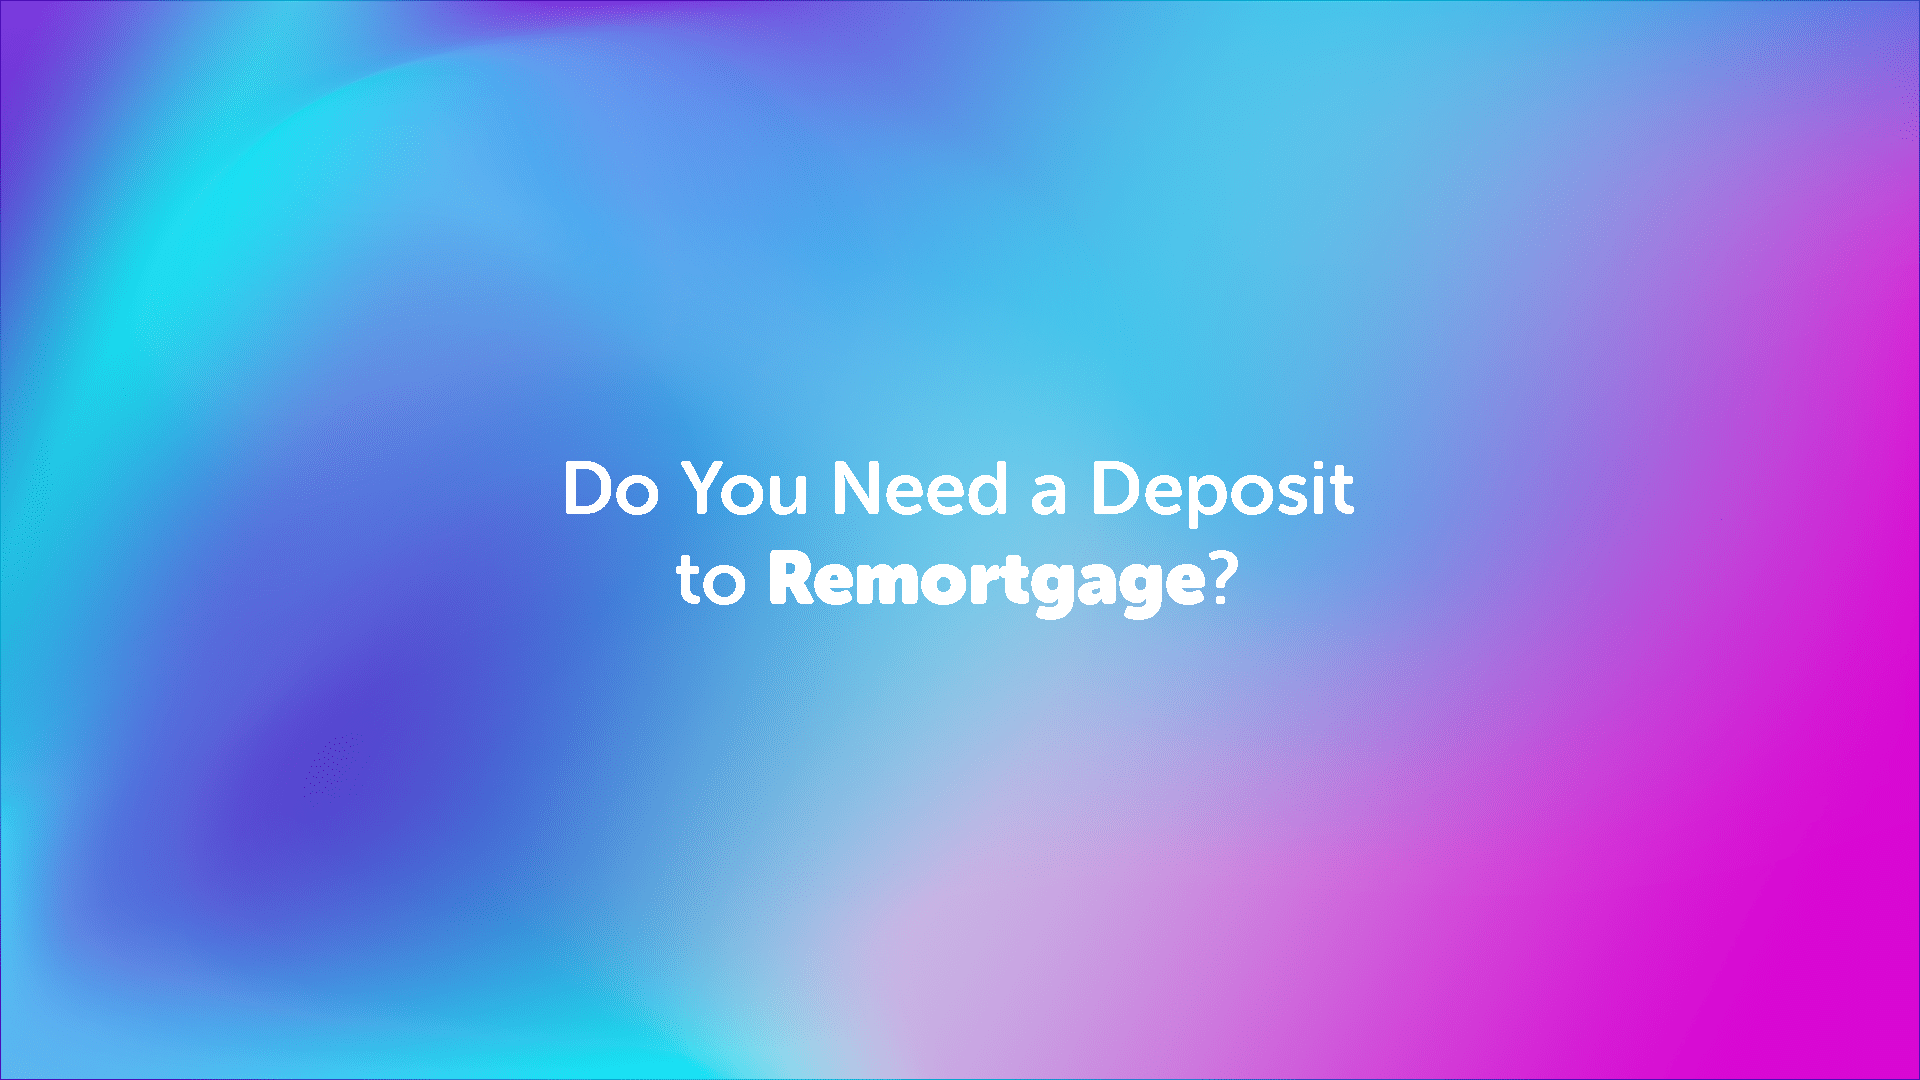 Do You Need a Deposit to Remortgage in Halifax?